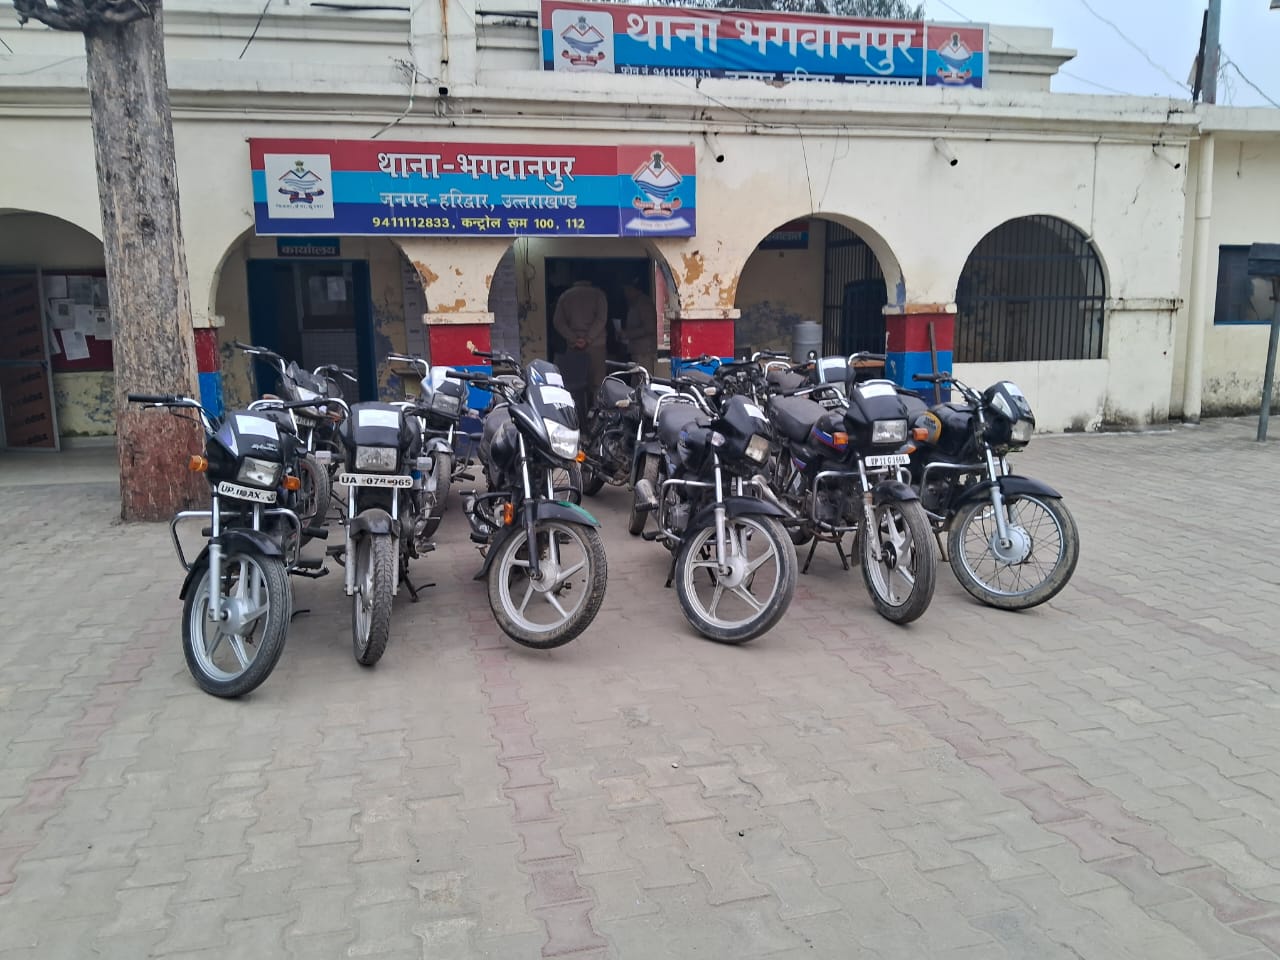 12 bikes recovered in Haridwar